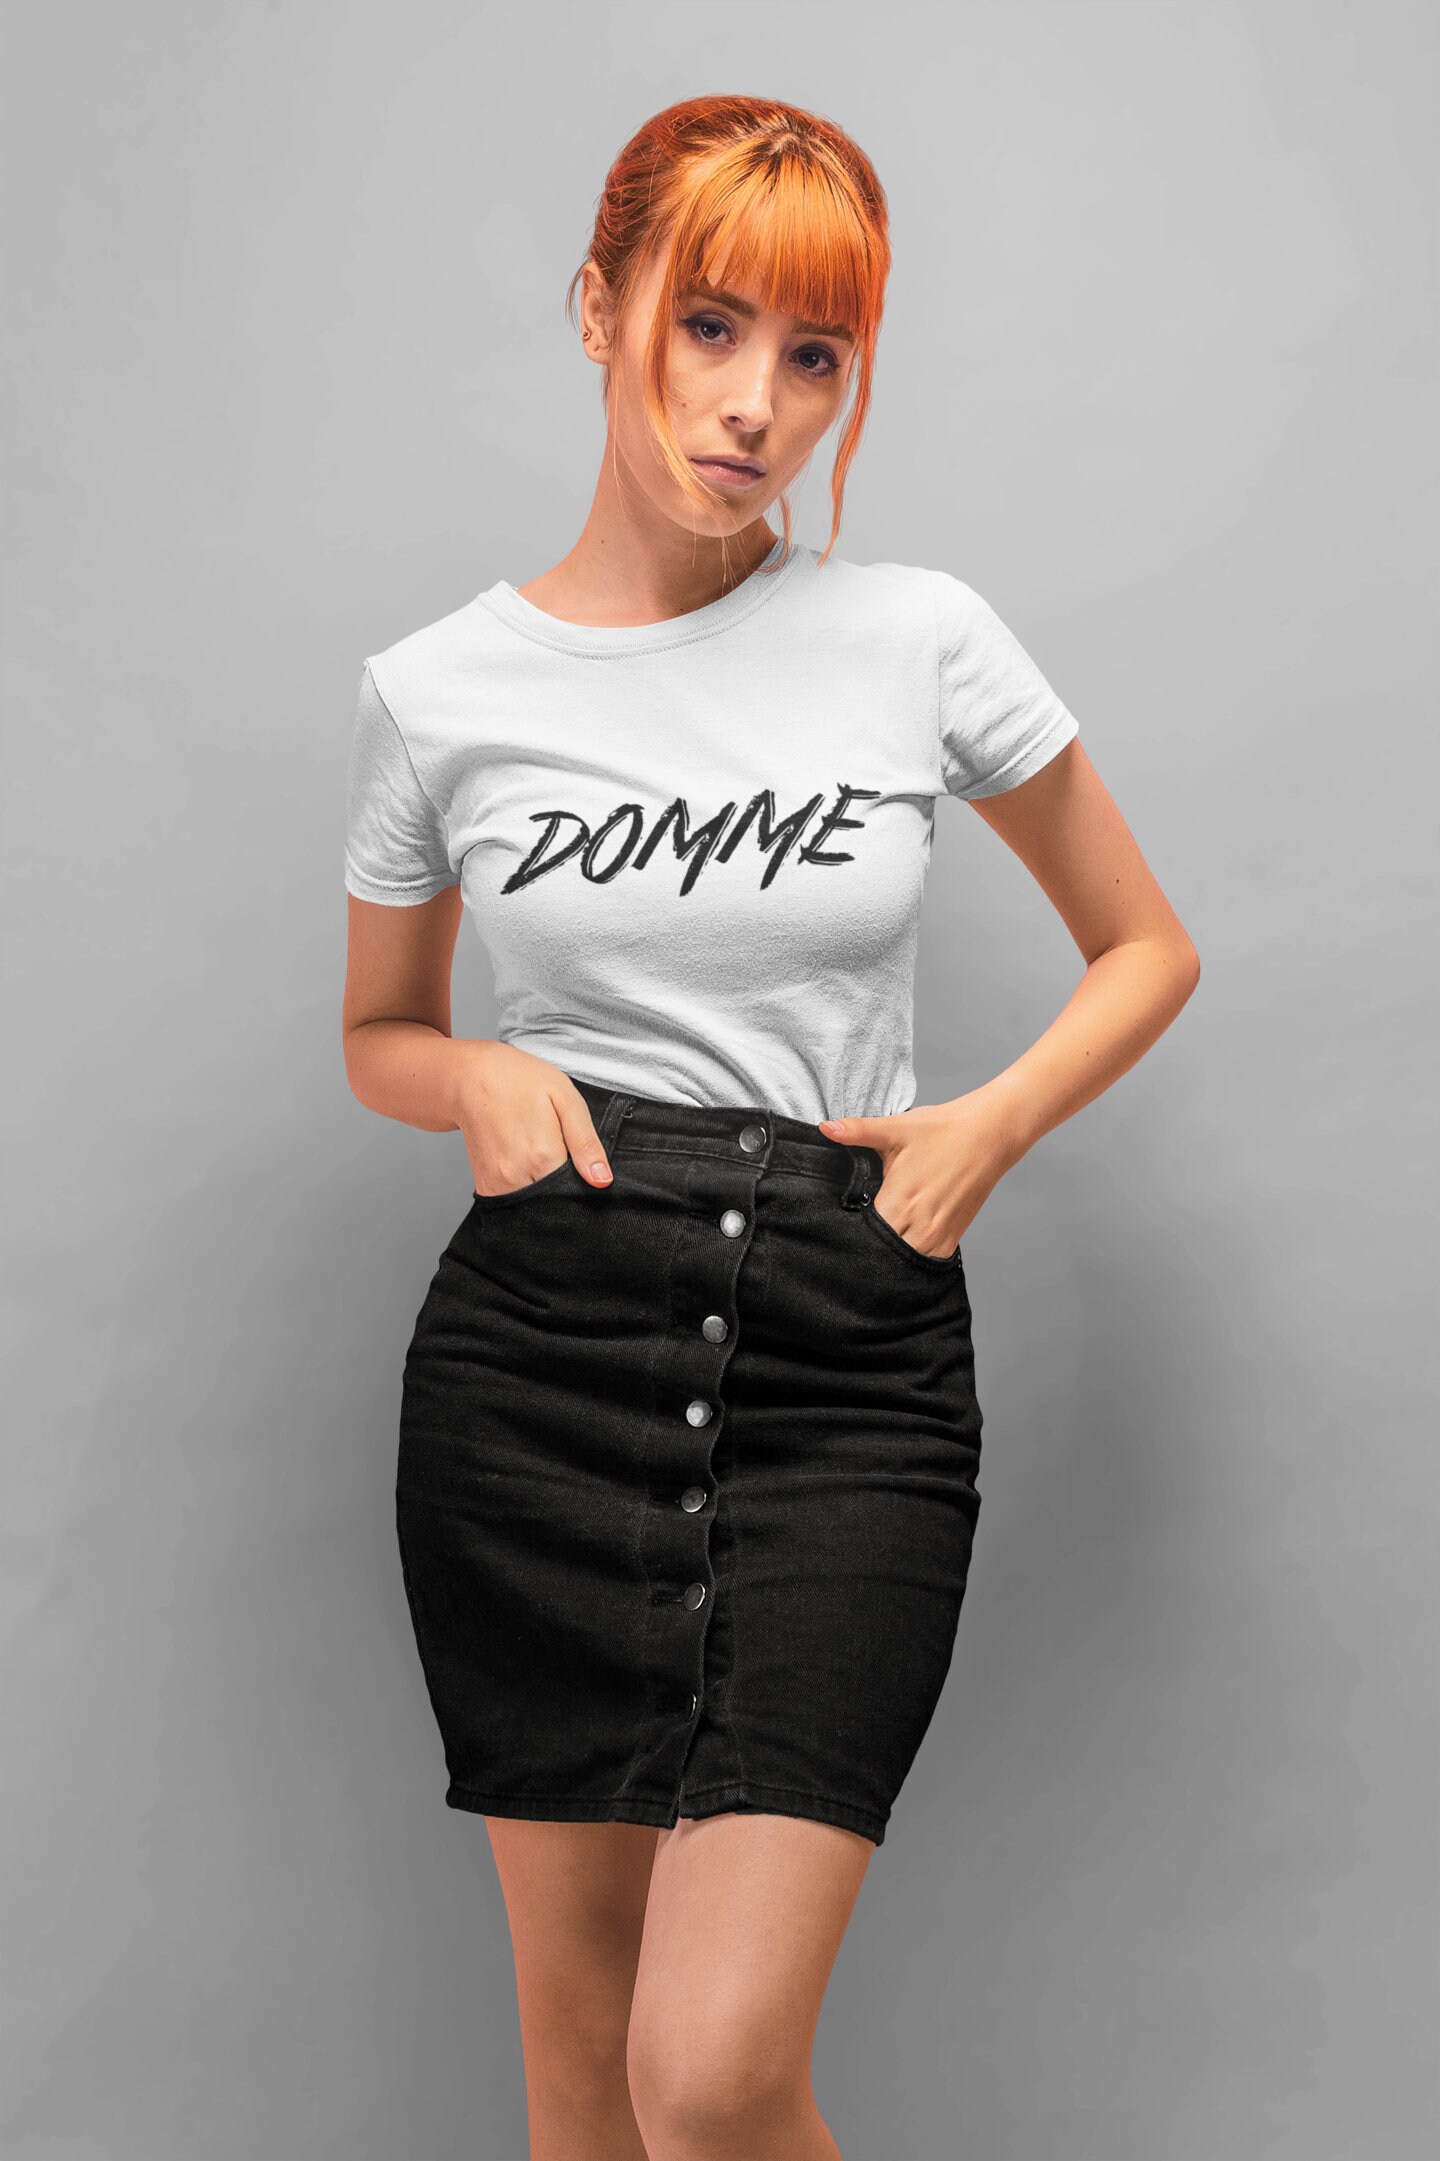 Domme clothing